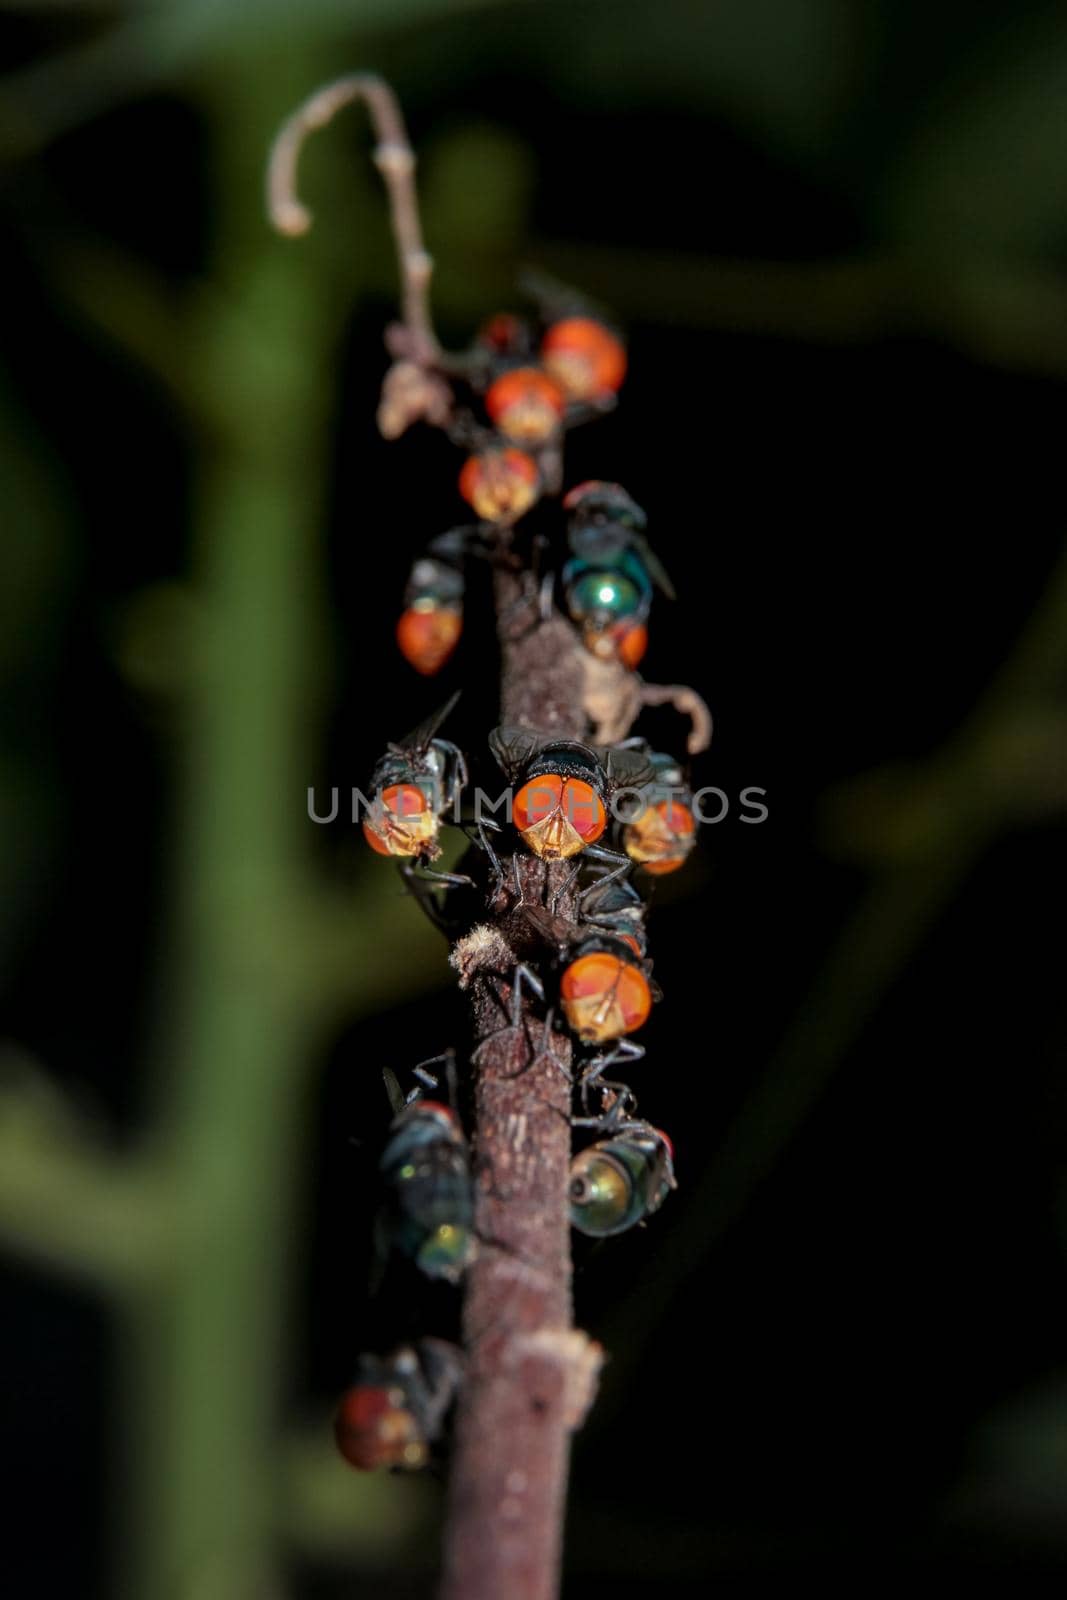 Some exotic flies sitting on branch in jungle